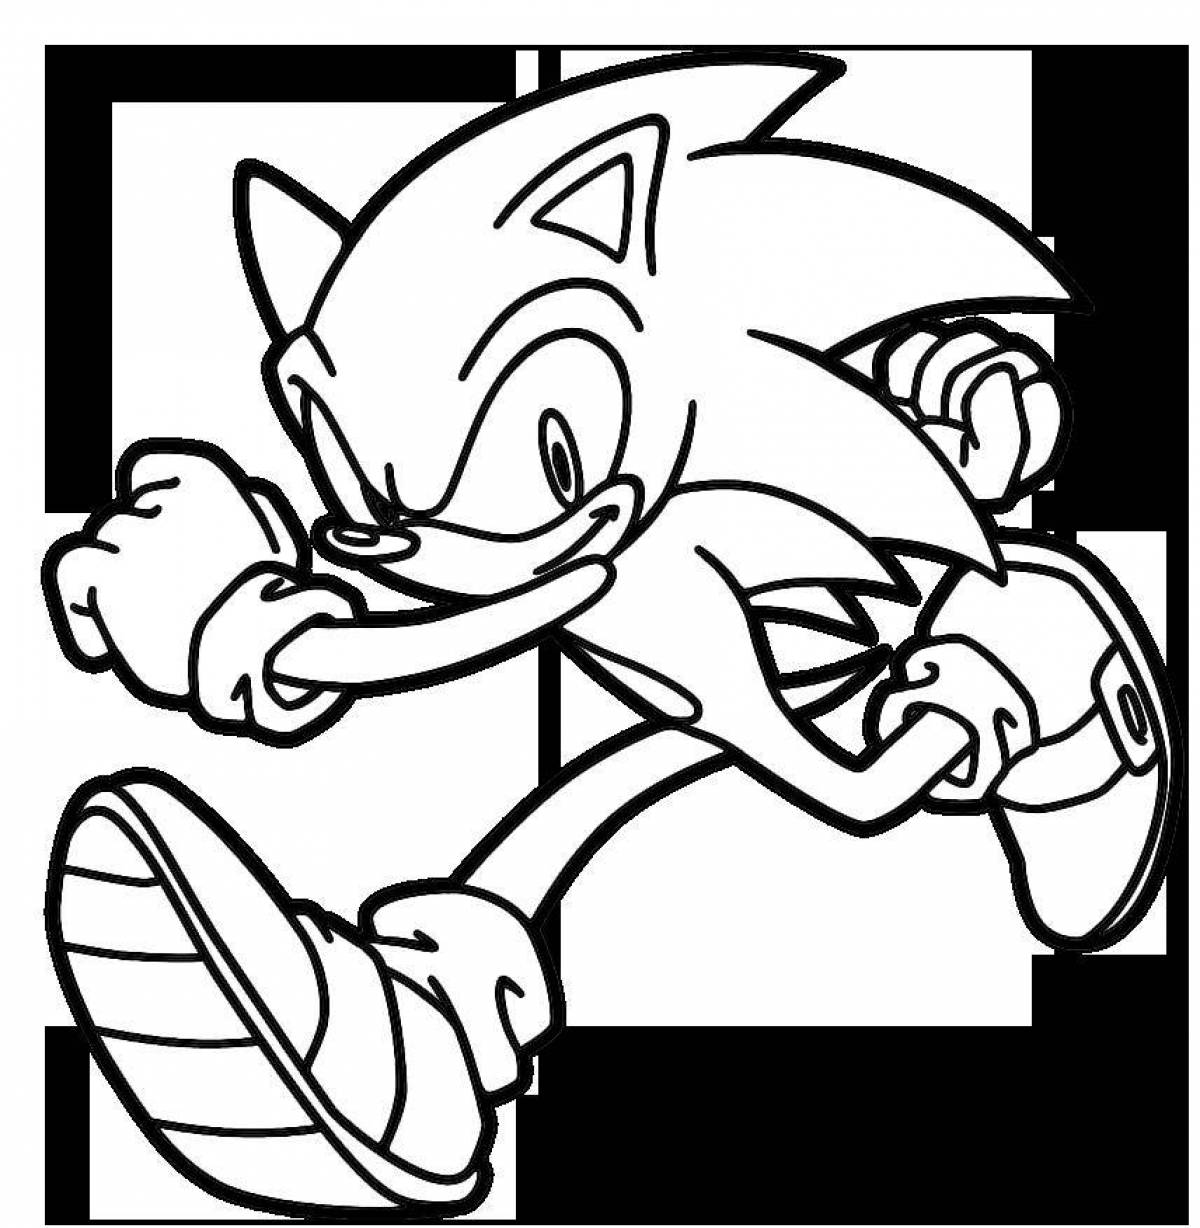 Exquisite sonic shadow coloring book